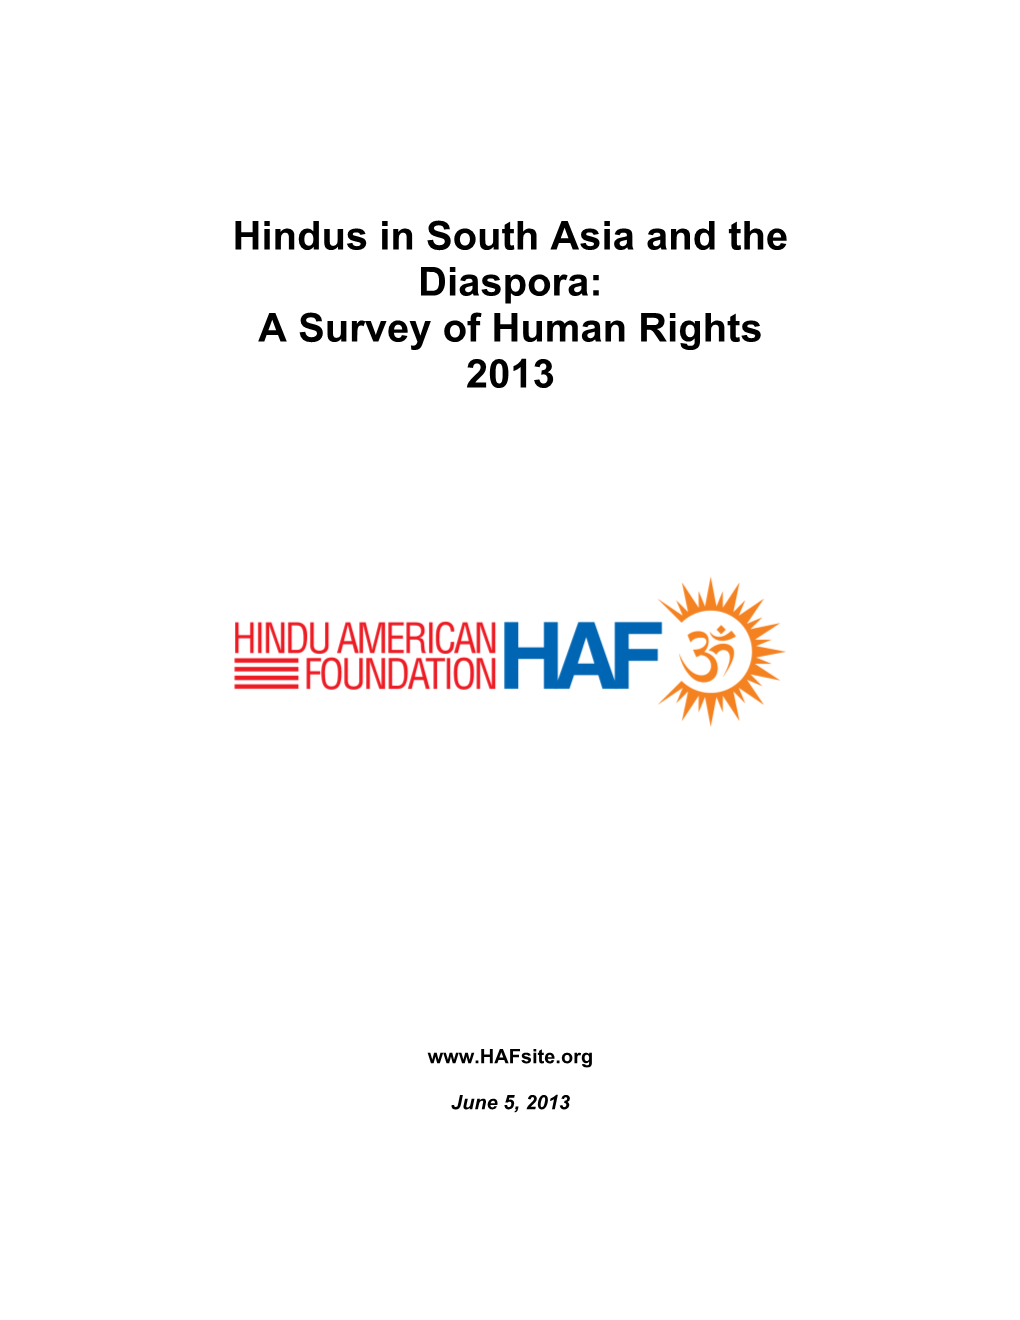 A Survey of Human Rights 2013